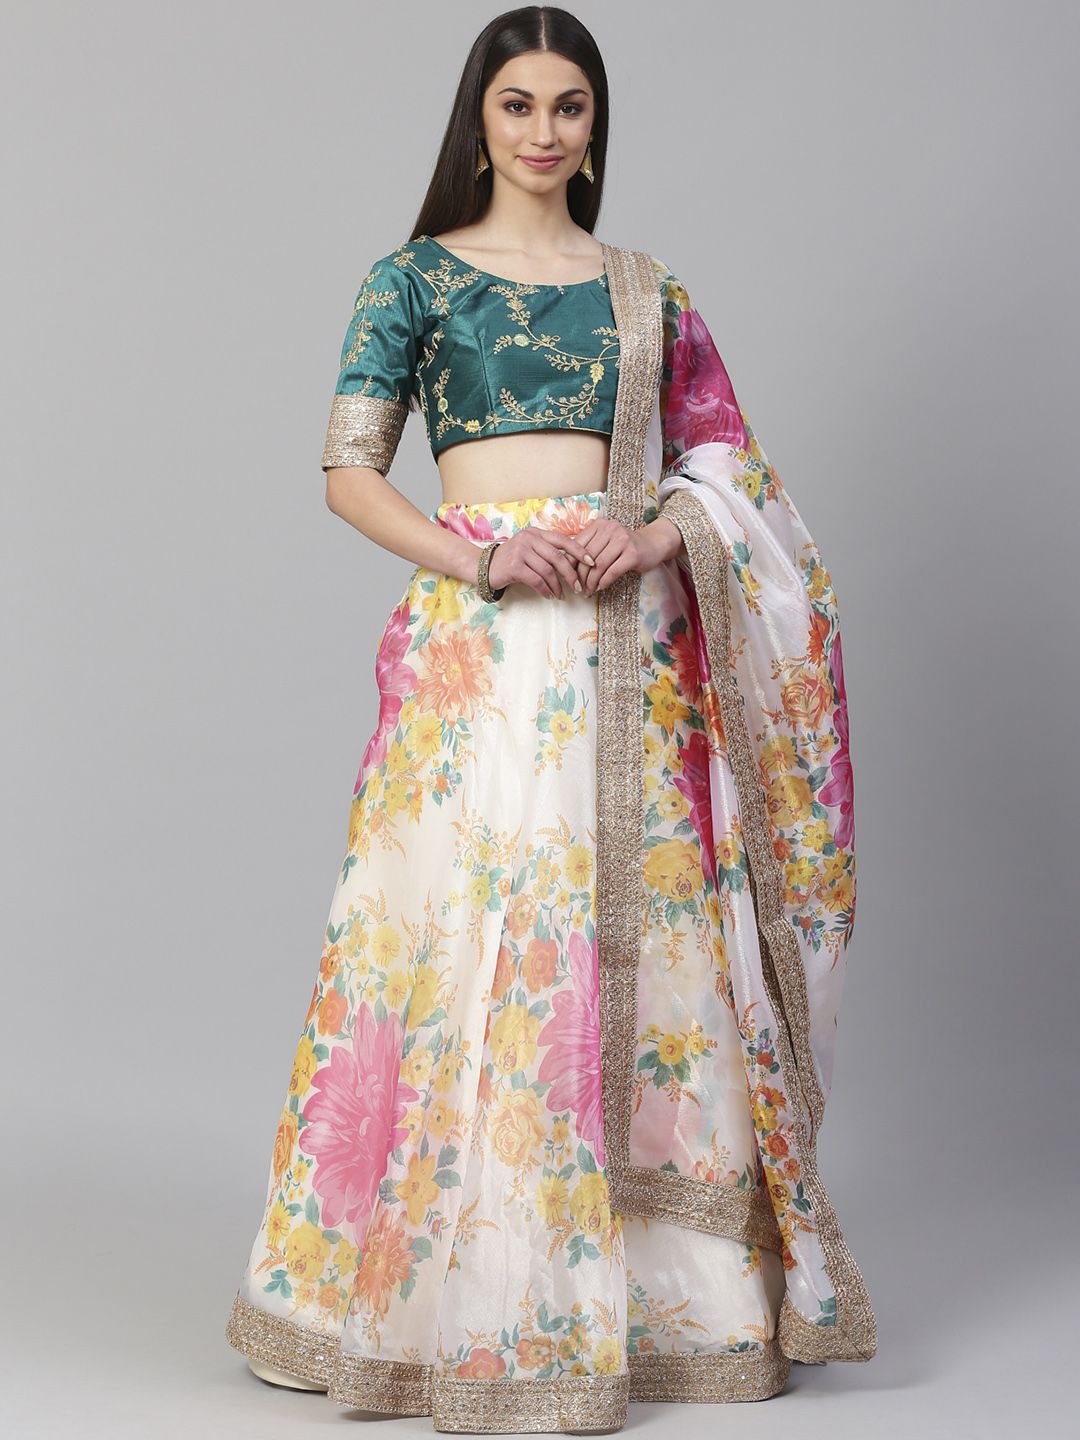 Readiprint Fashions Off-White Semi-Stitched Lehenga & Unstitched Blouse with Dupatta Price in India